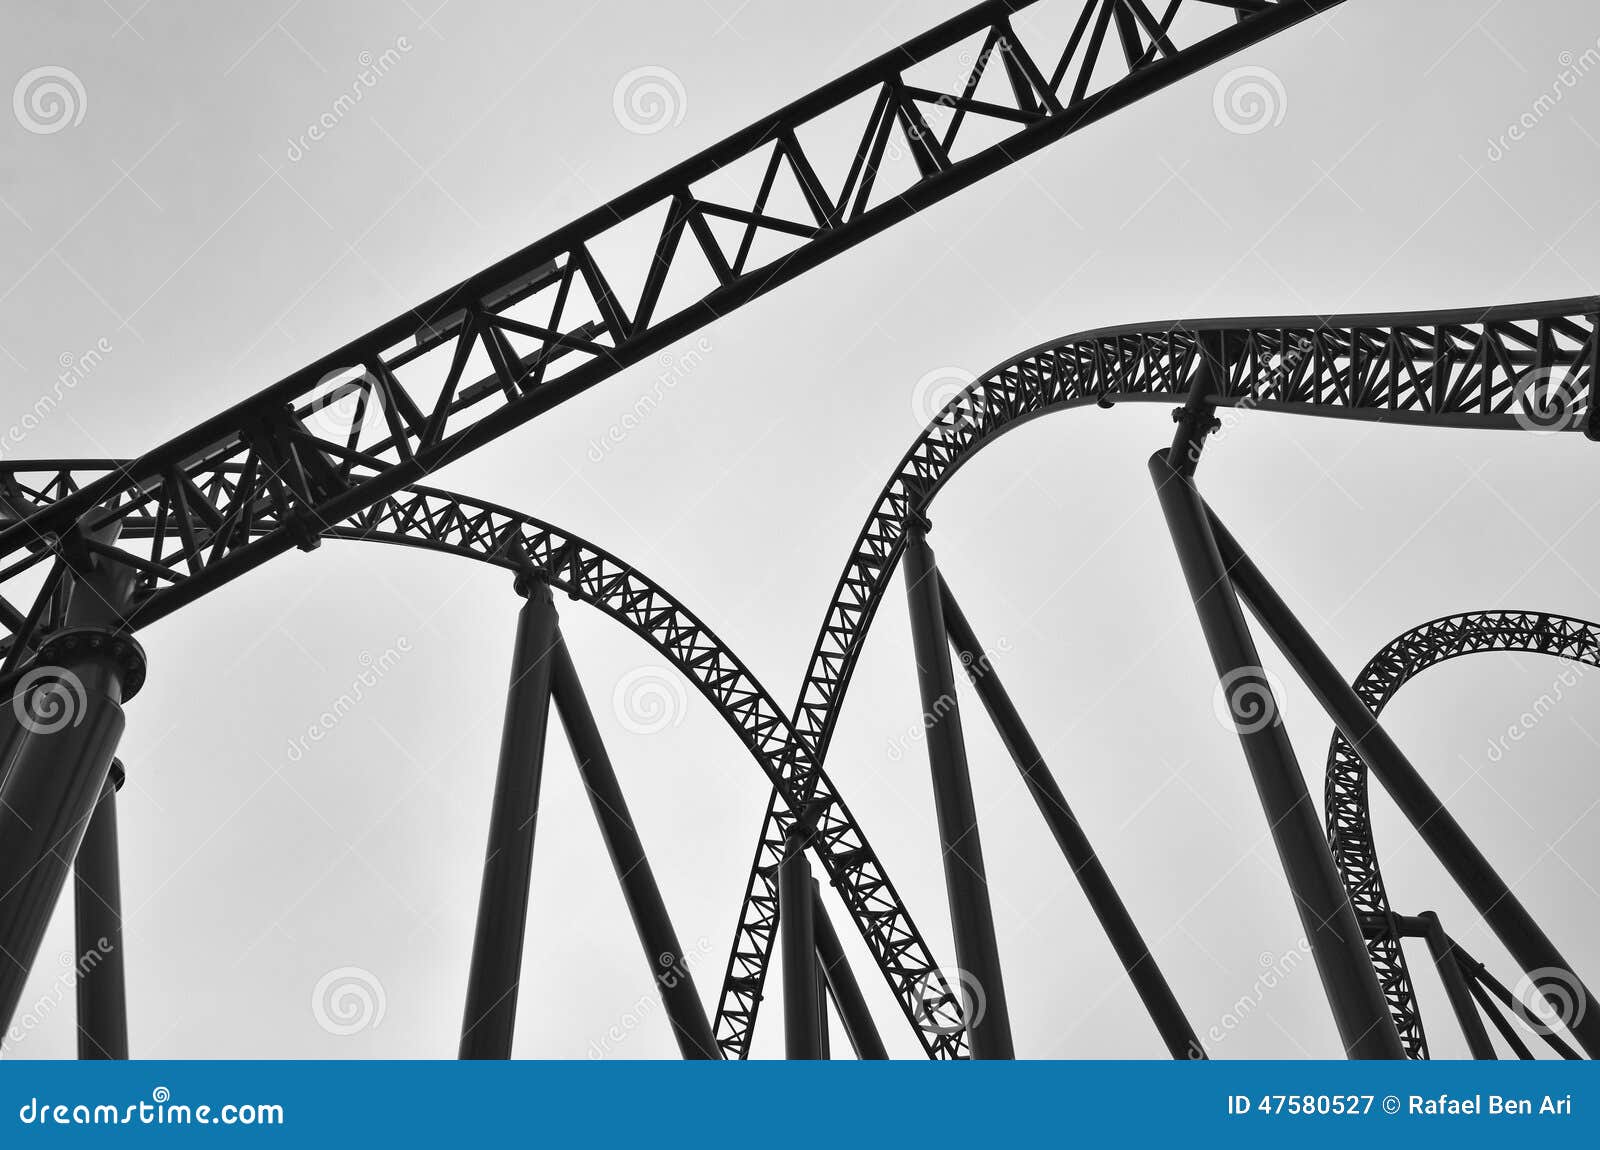 Roller Coaster Track Construction Stock Image - Image of engineering ...